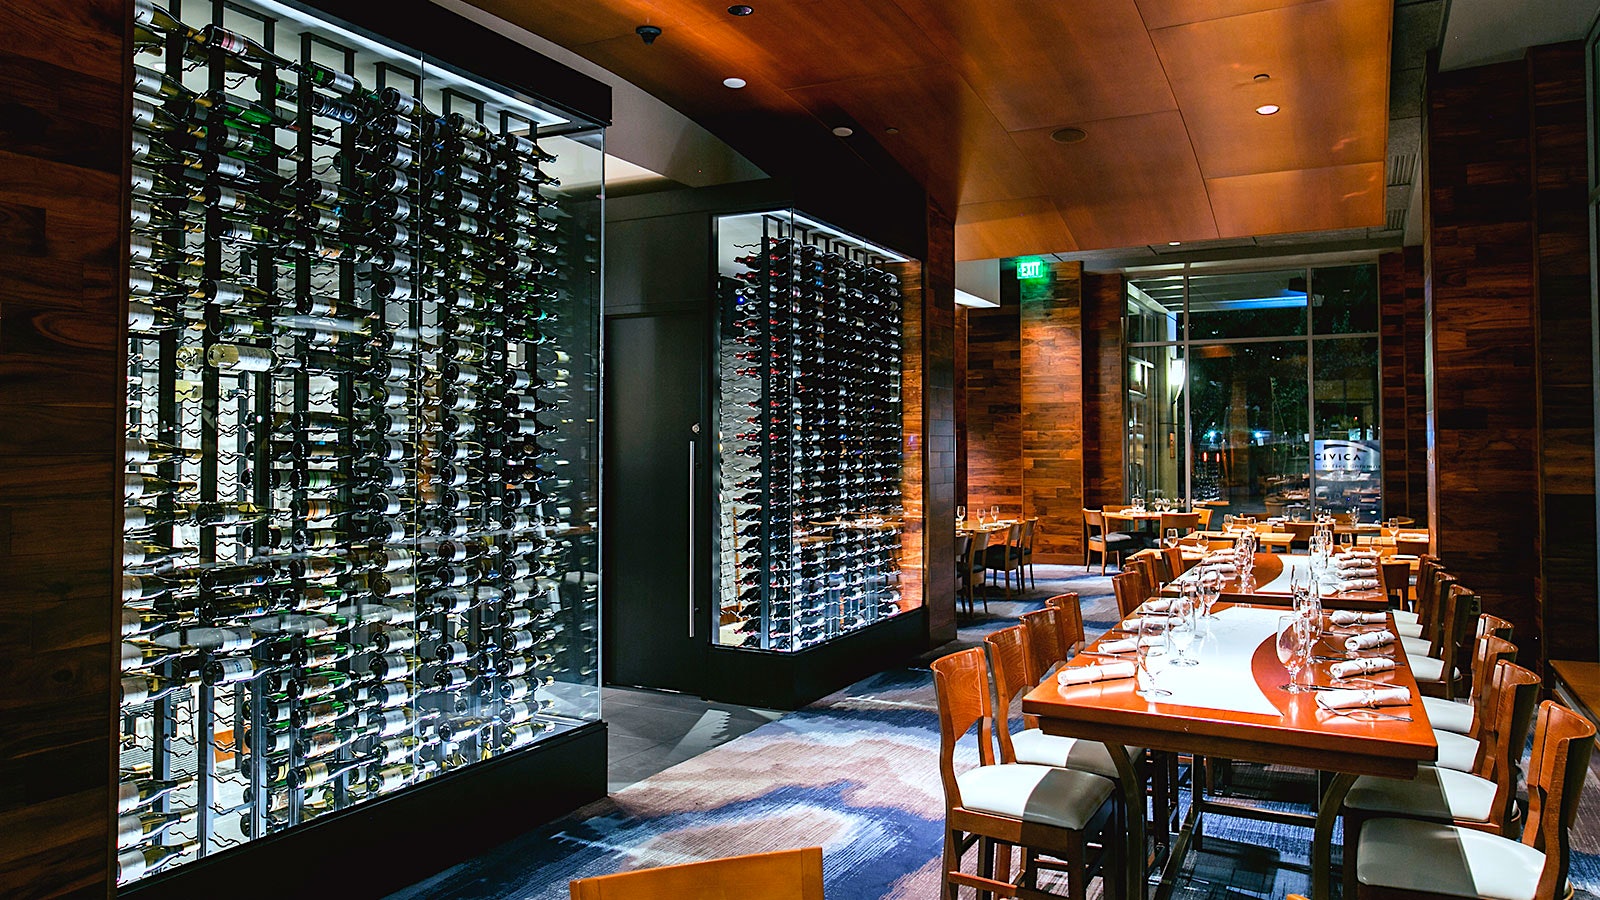  Wooden tables and chairs with white cushions at Seastar Restaurant and Raw Bar, with glass-covered racks of wine bottles and a sleek, modern design throughout